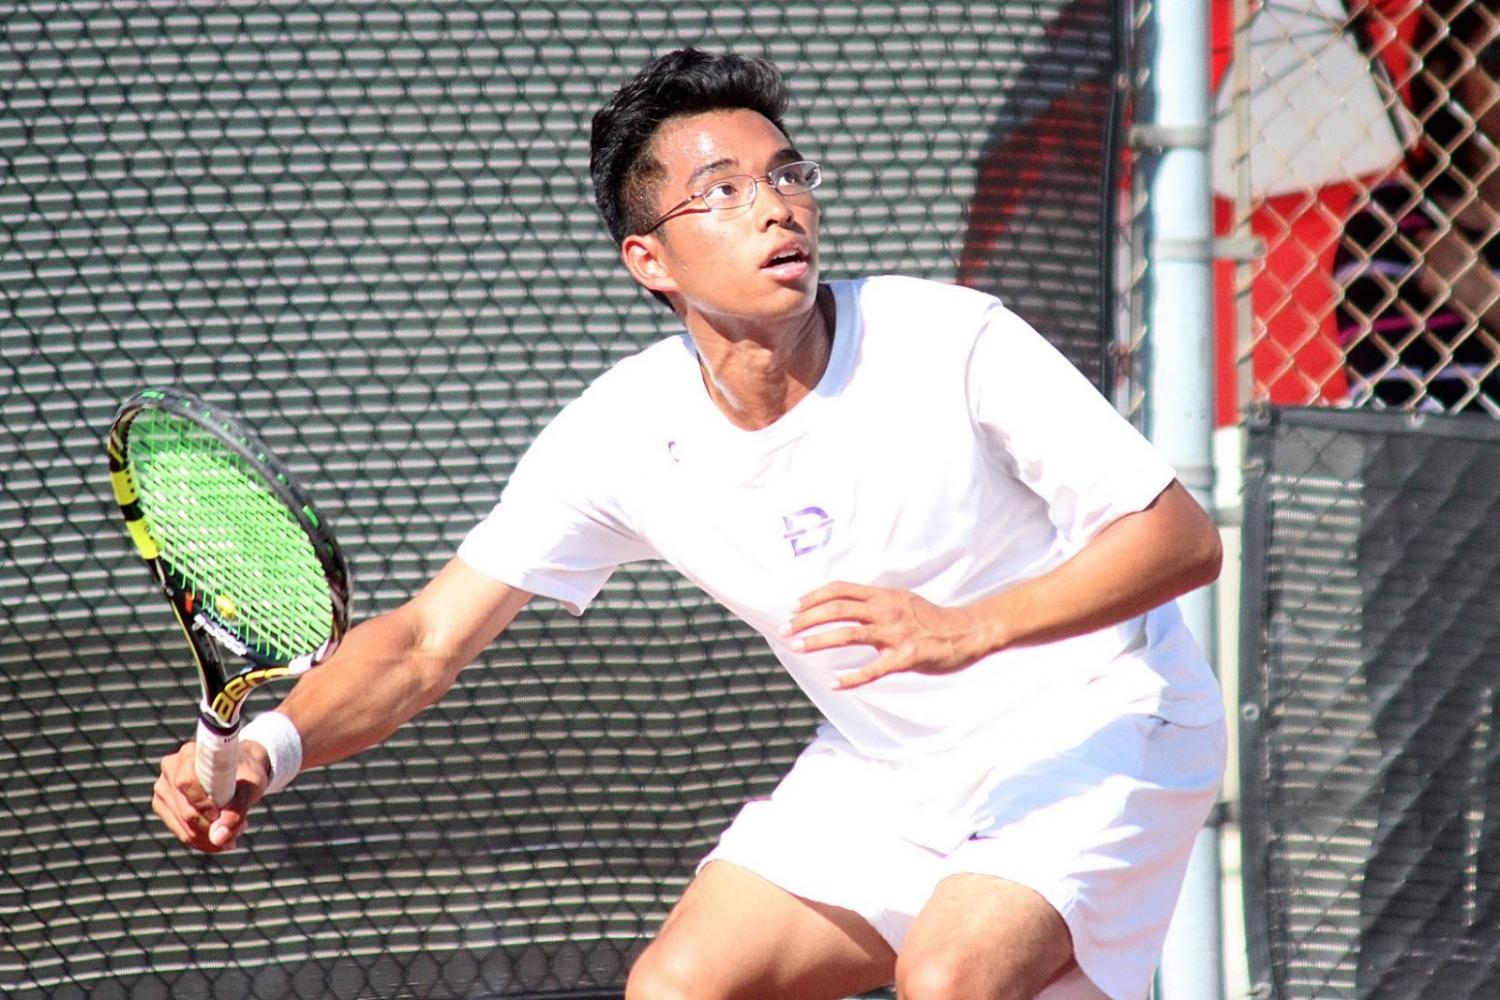 Senior Neil Tengbumroong earned a National Doubles Title in Sacramento.